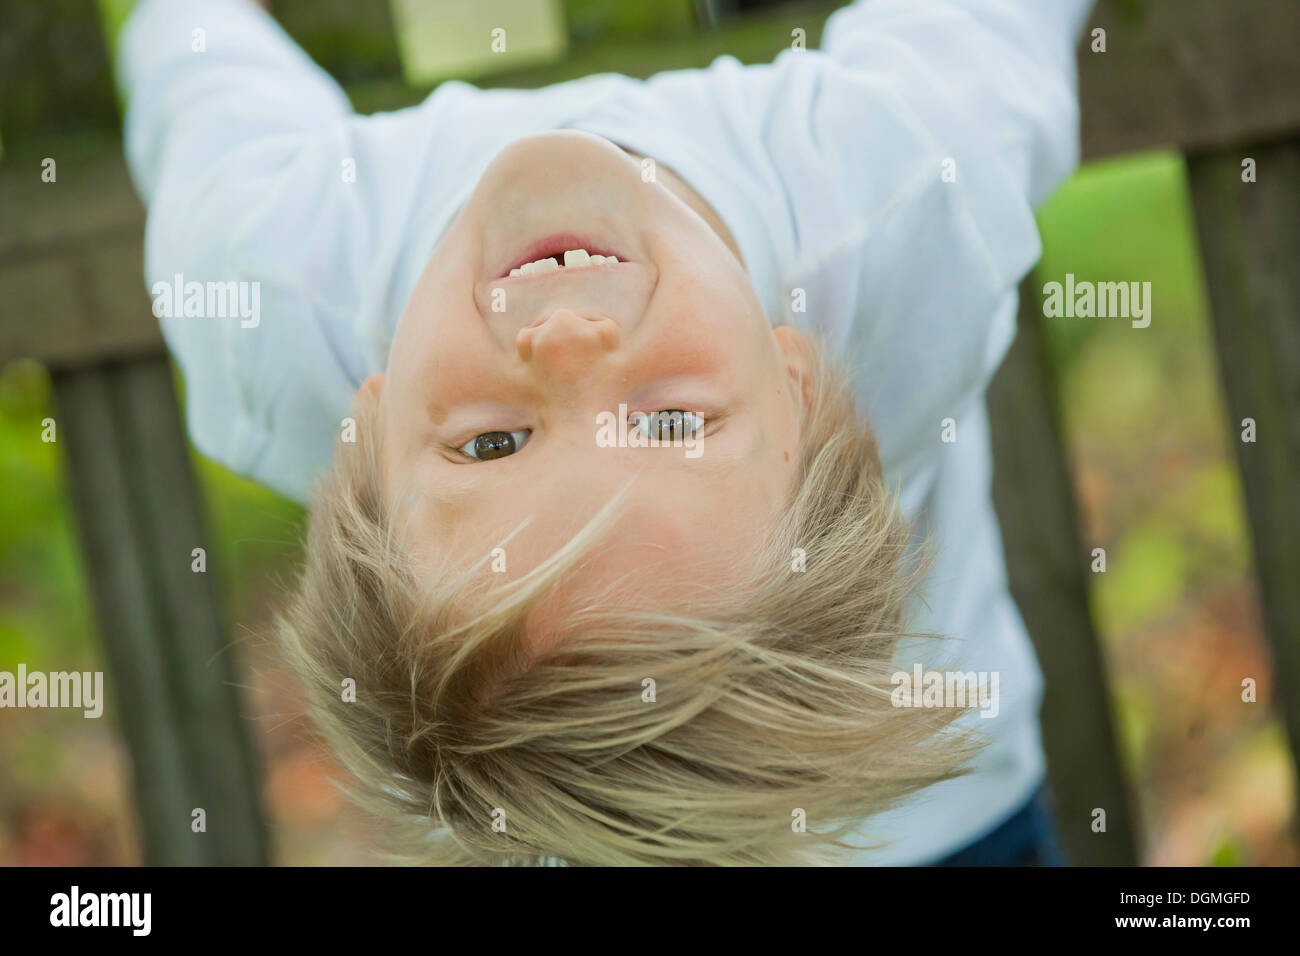 Boy, 7 years old, hanging on to a wooden fence, upside down Stock Photo